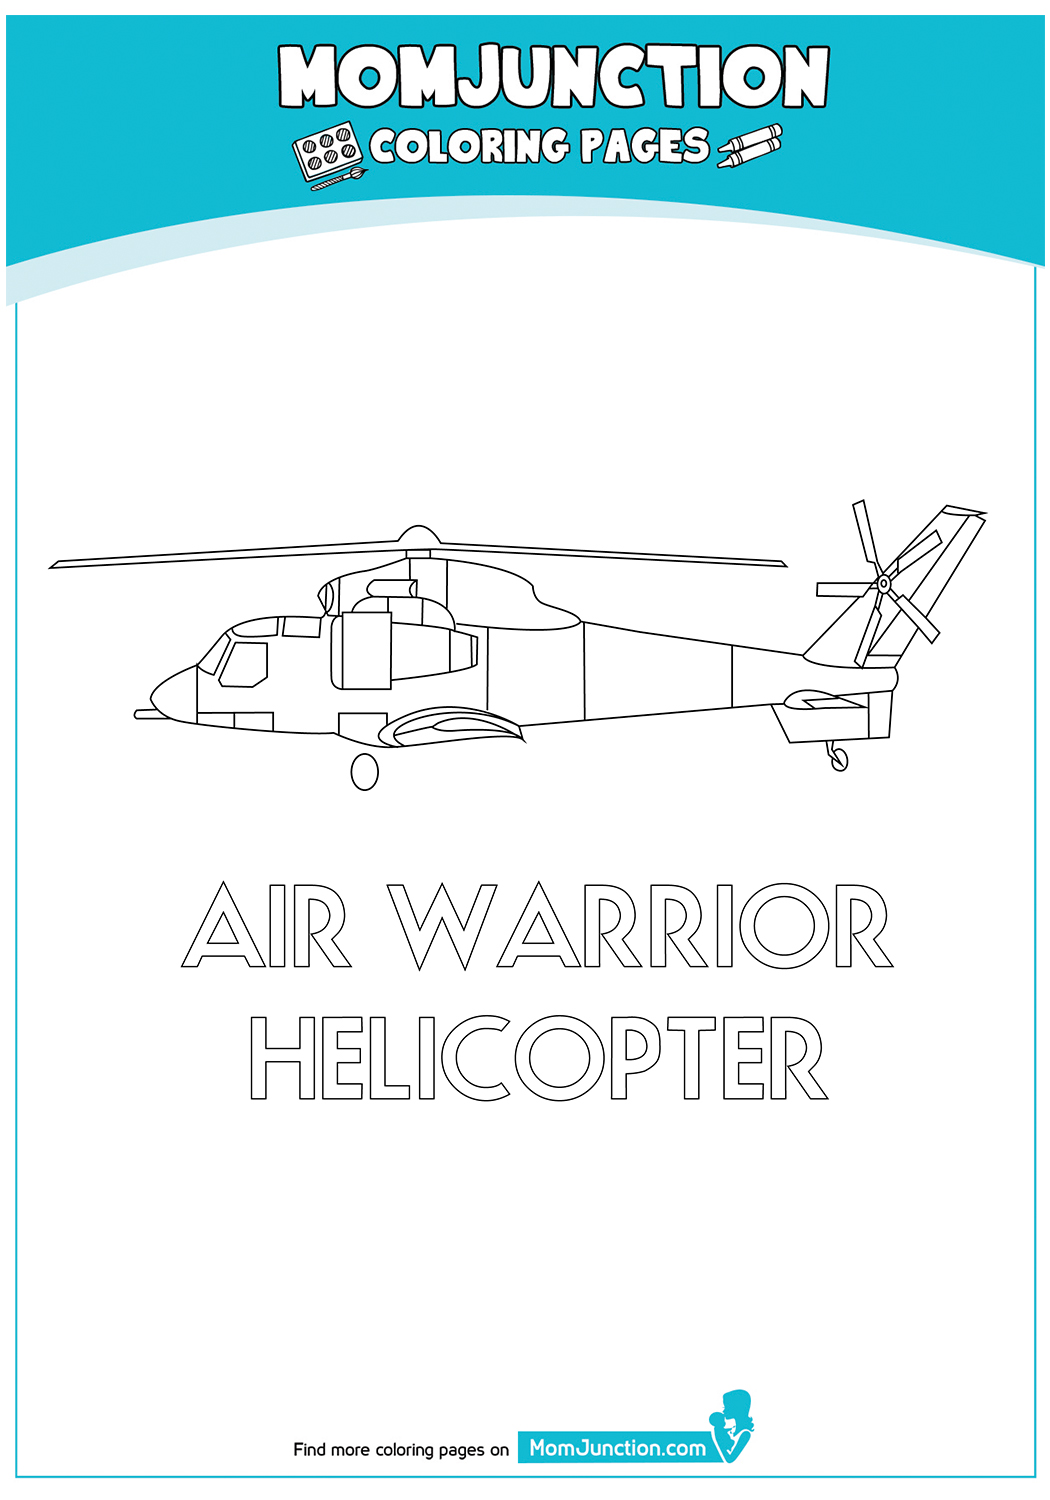 A-Warrior-Helicopters-17